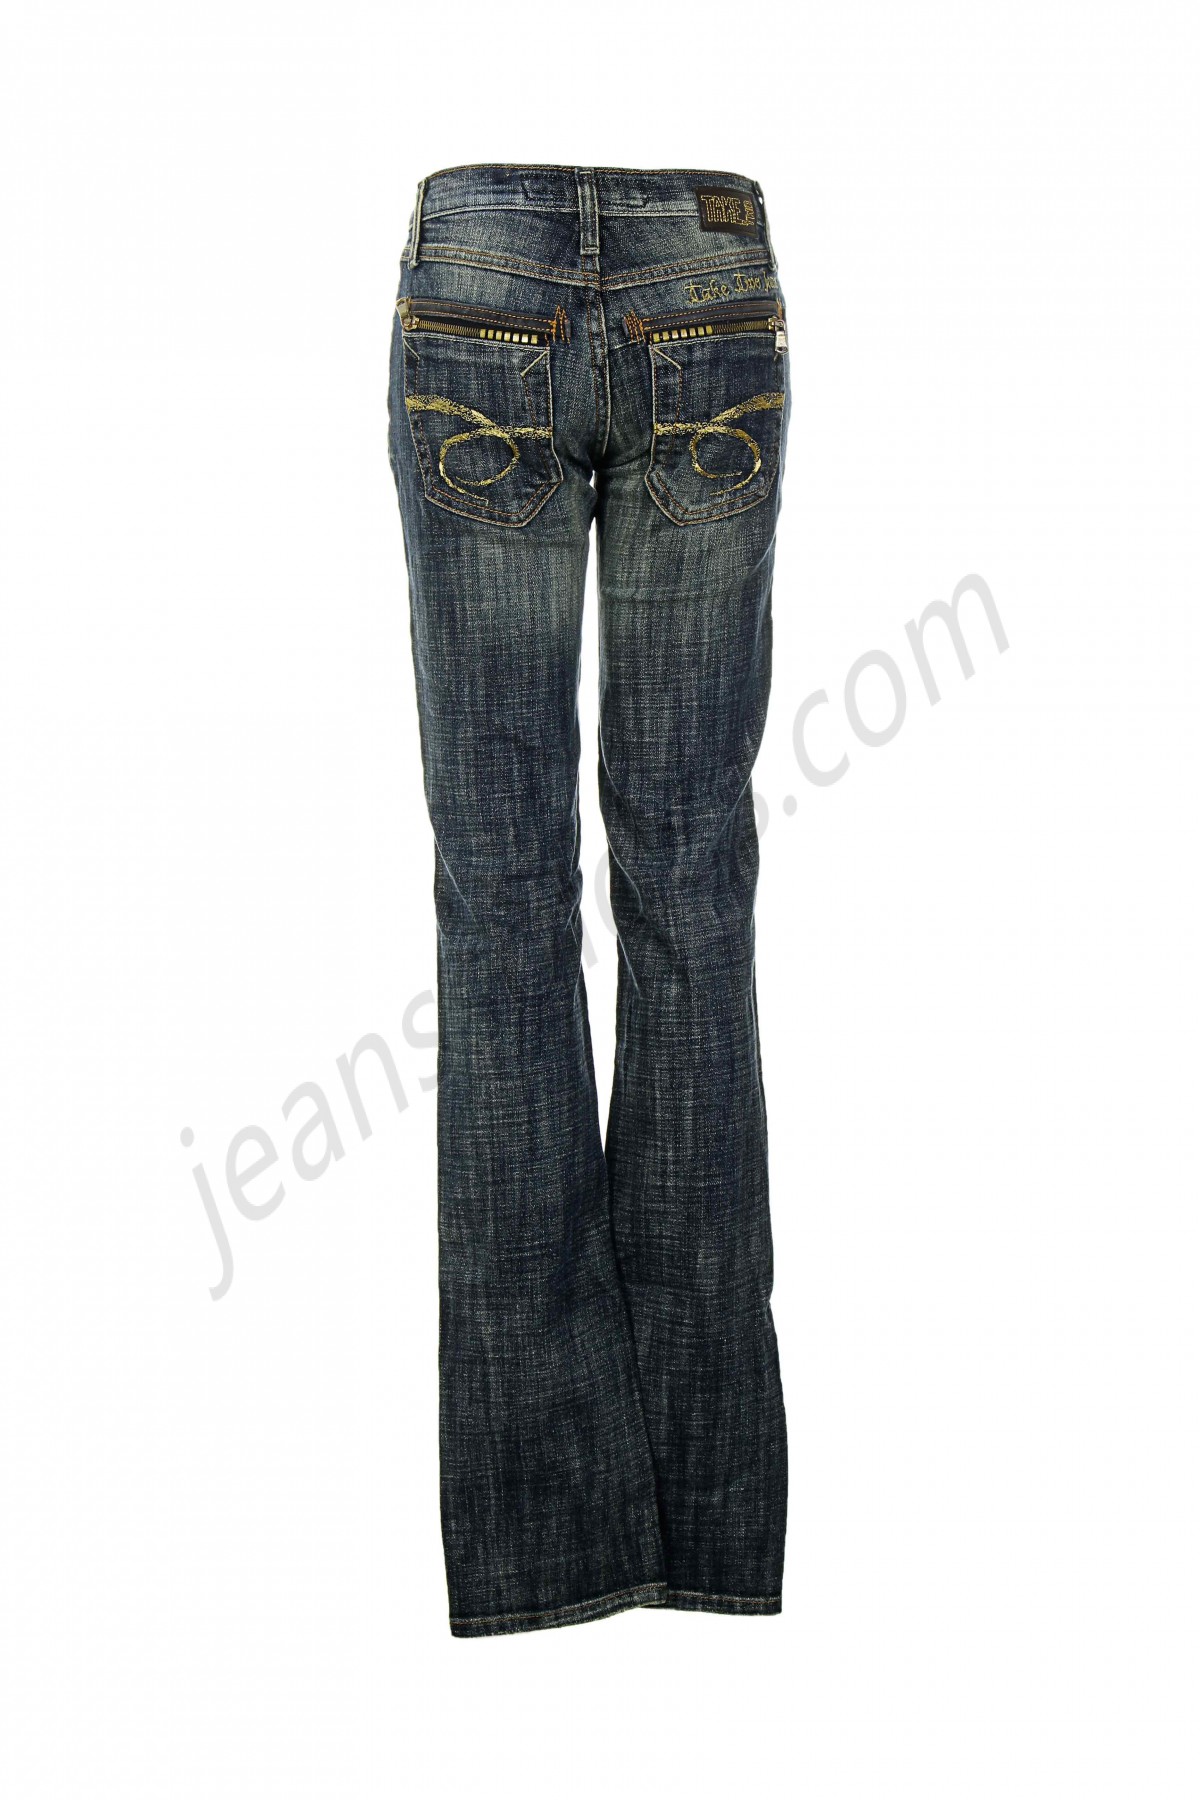 take two-Jeans coupe droite prix d’amis - -1